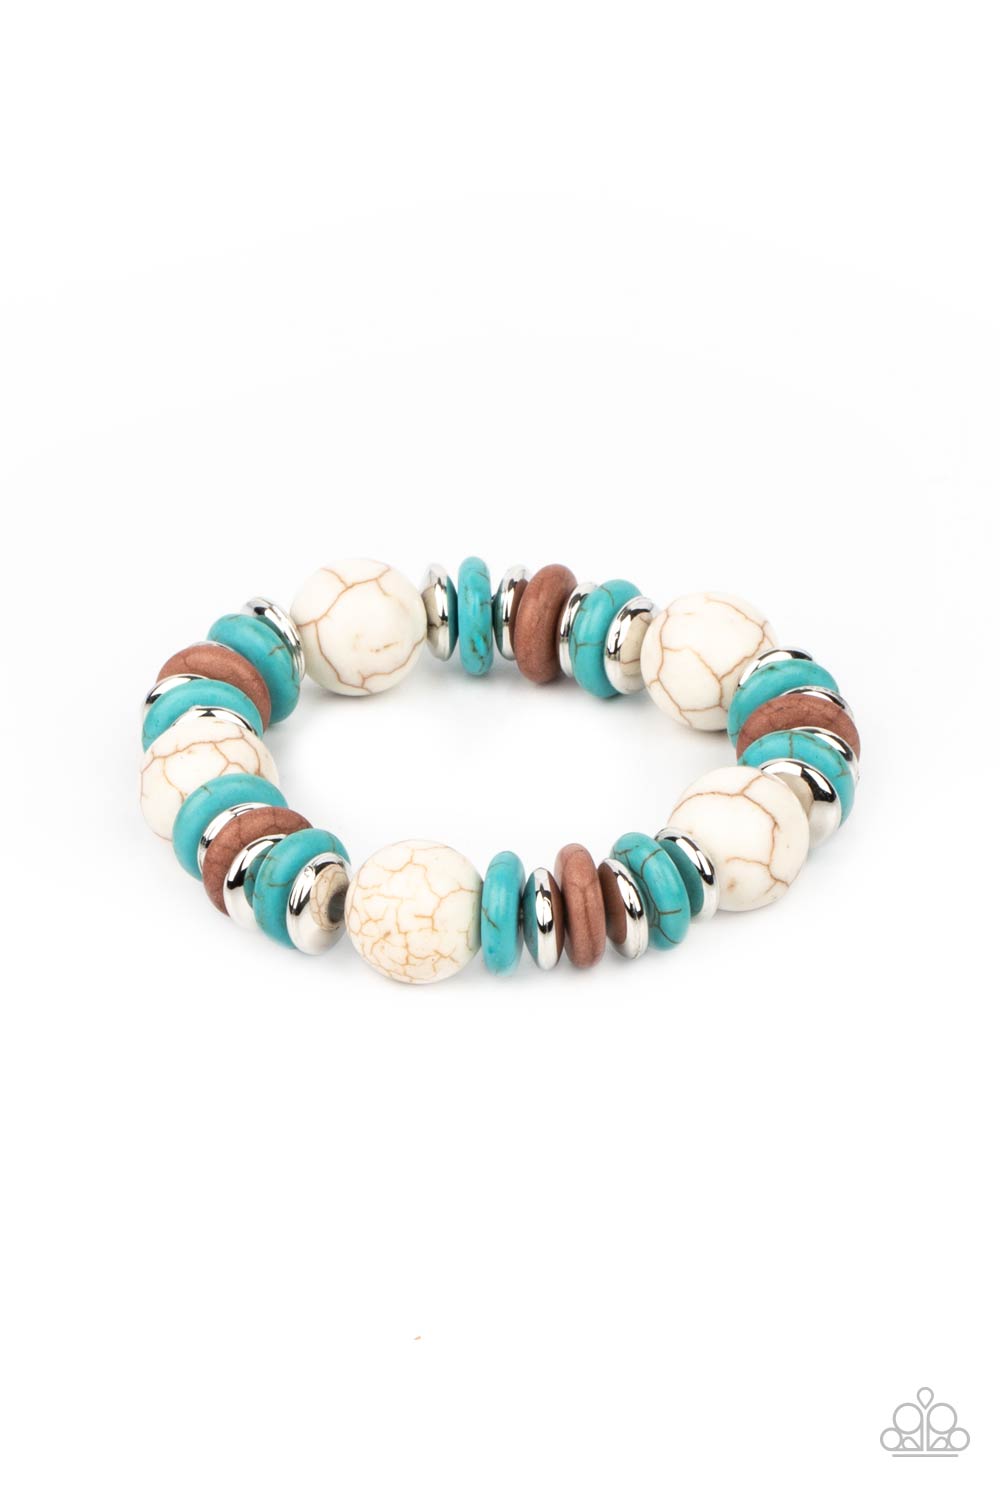 Rustic Rival Multi White and Turquoise Stone Bracelet - Paparazzi Accessories- lightbox - CarasShop.com - $5 Jewelry by Cara Jewels